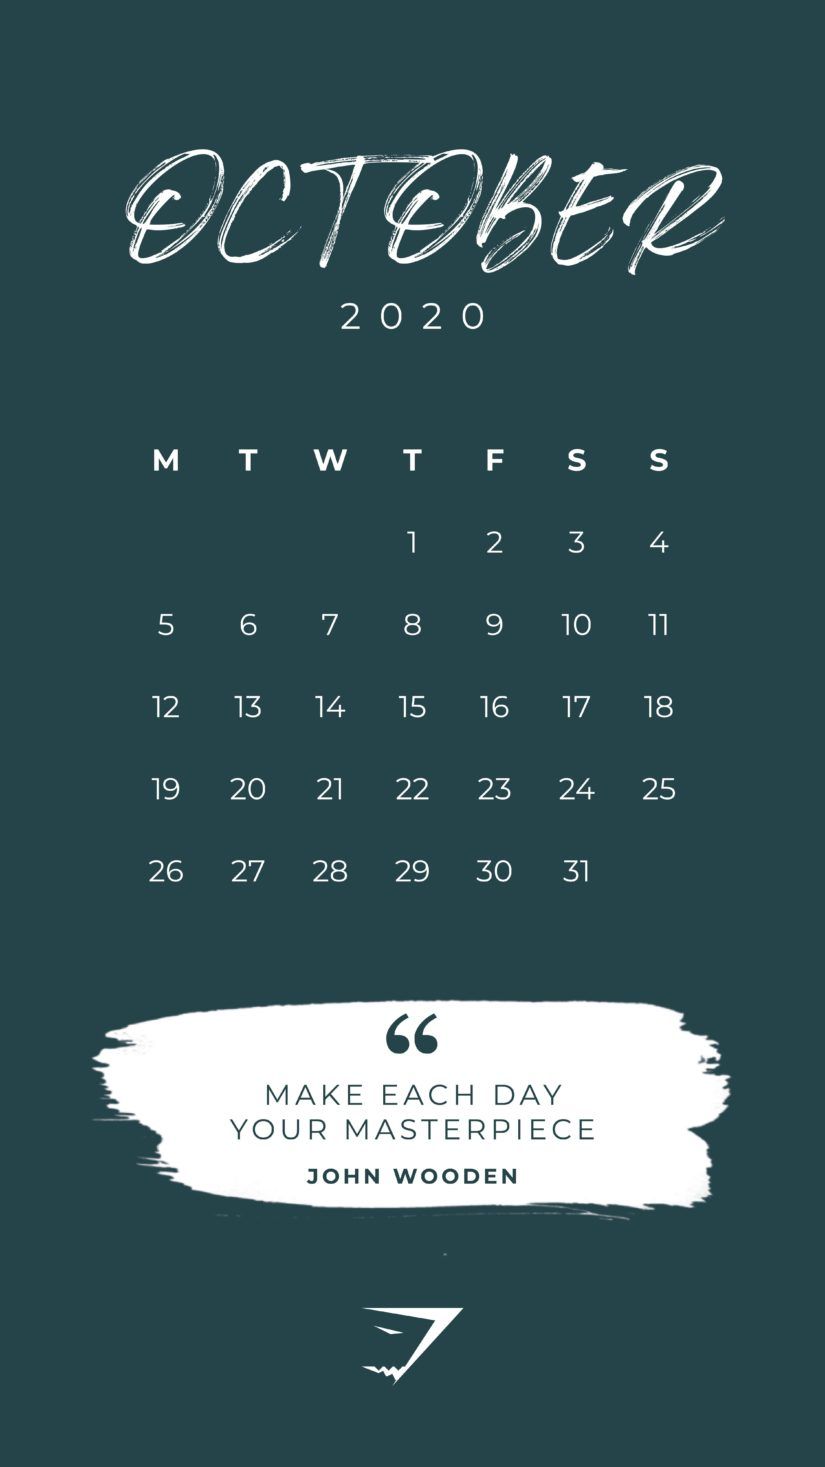 50 Free Printable October 2020 Calendars with Holidays trong 2020